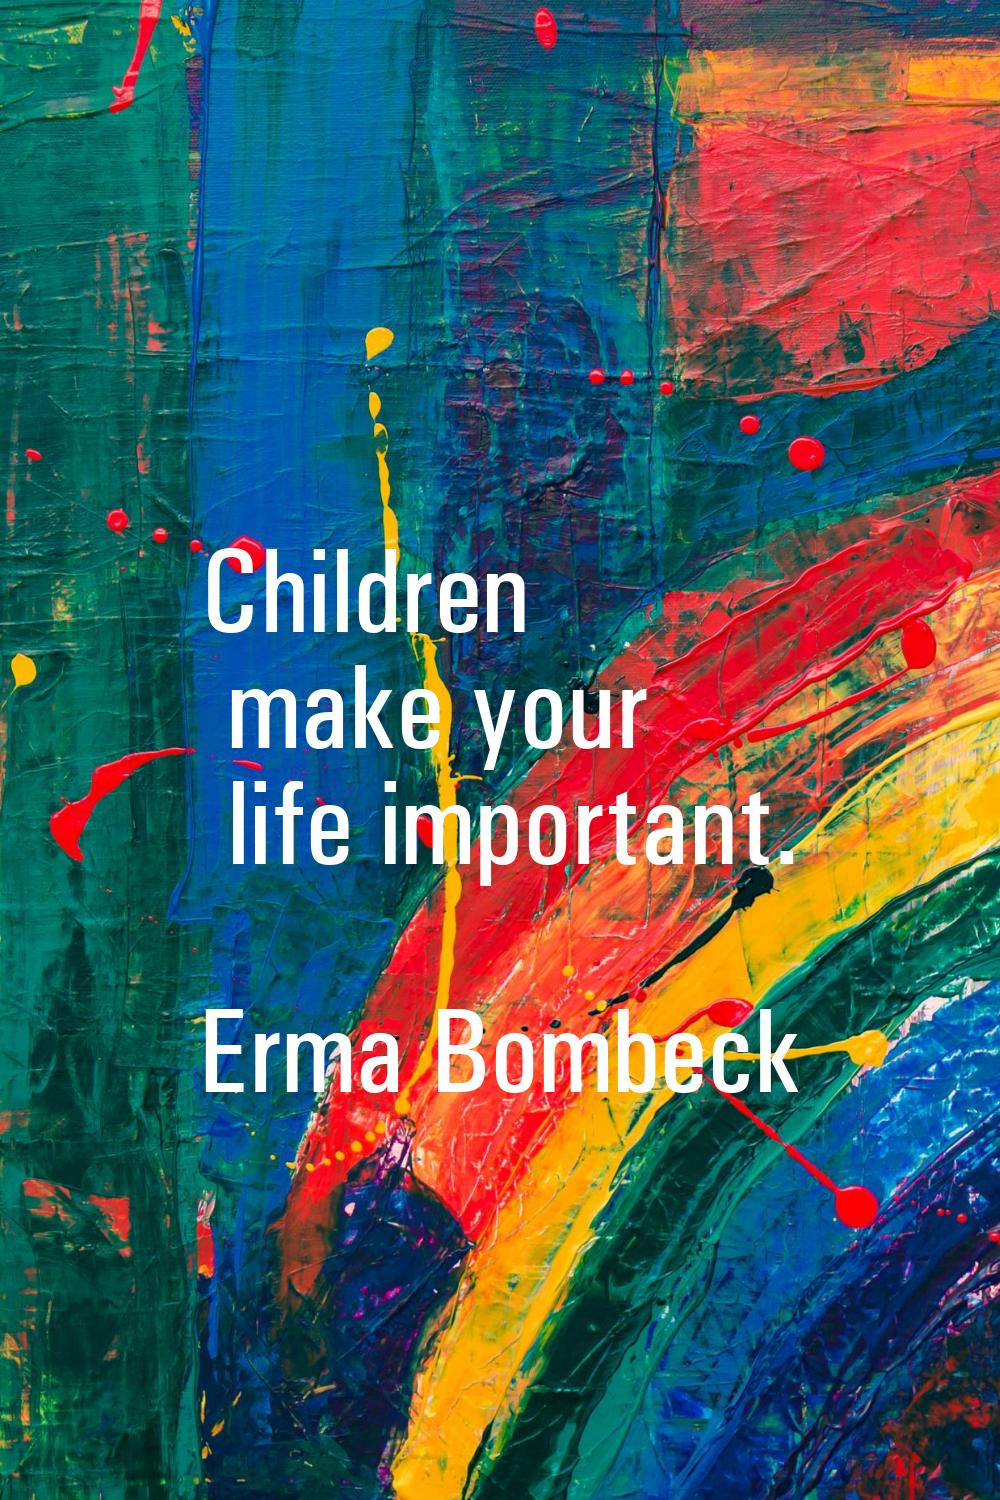 Children make your life important.